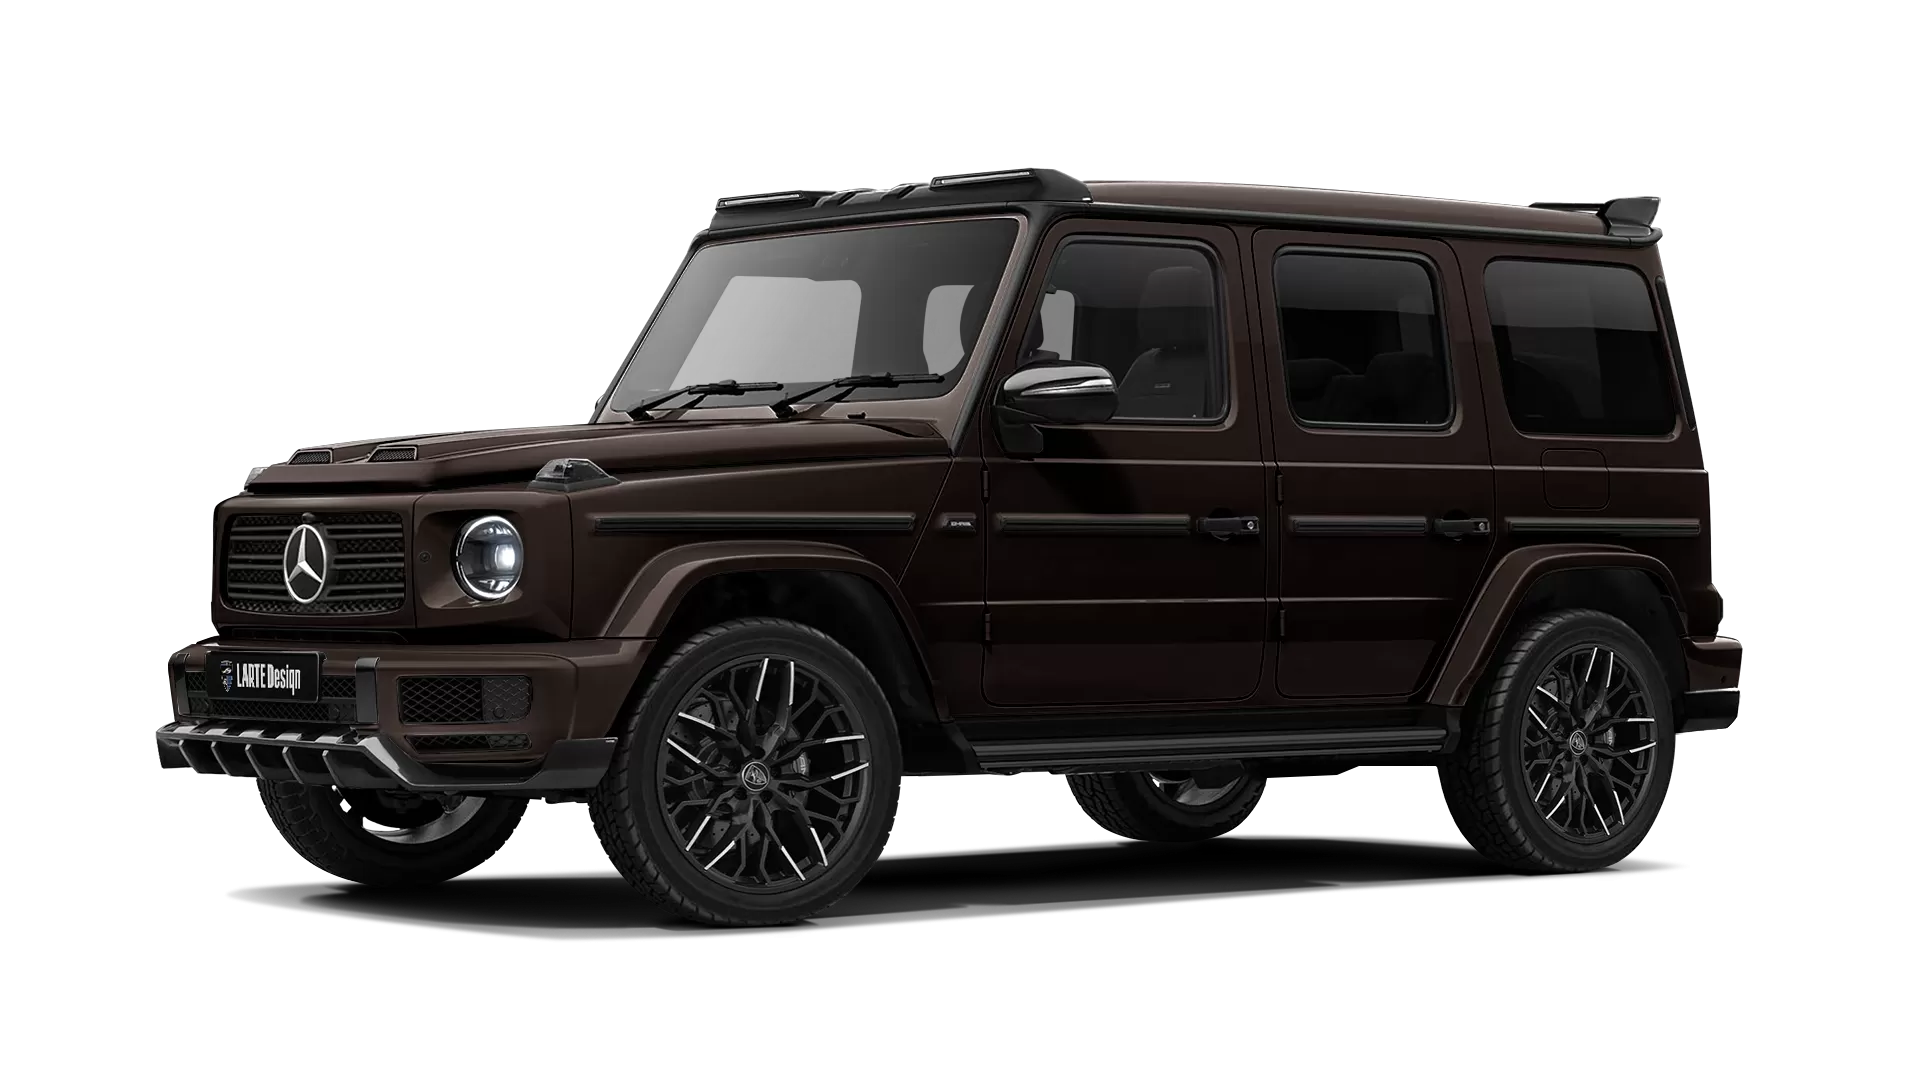 Mercedes G class W463 with painted body kit: front view shown in Citrine Brown